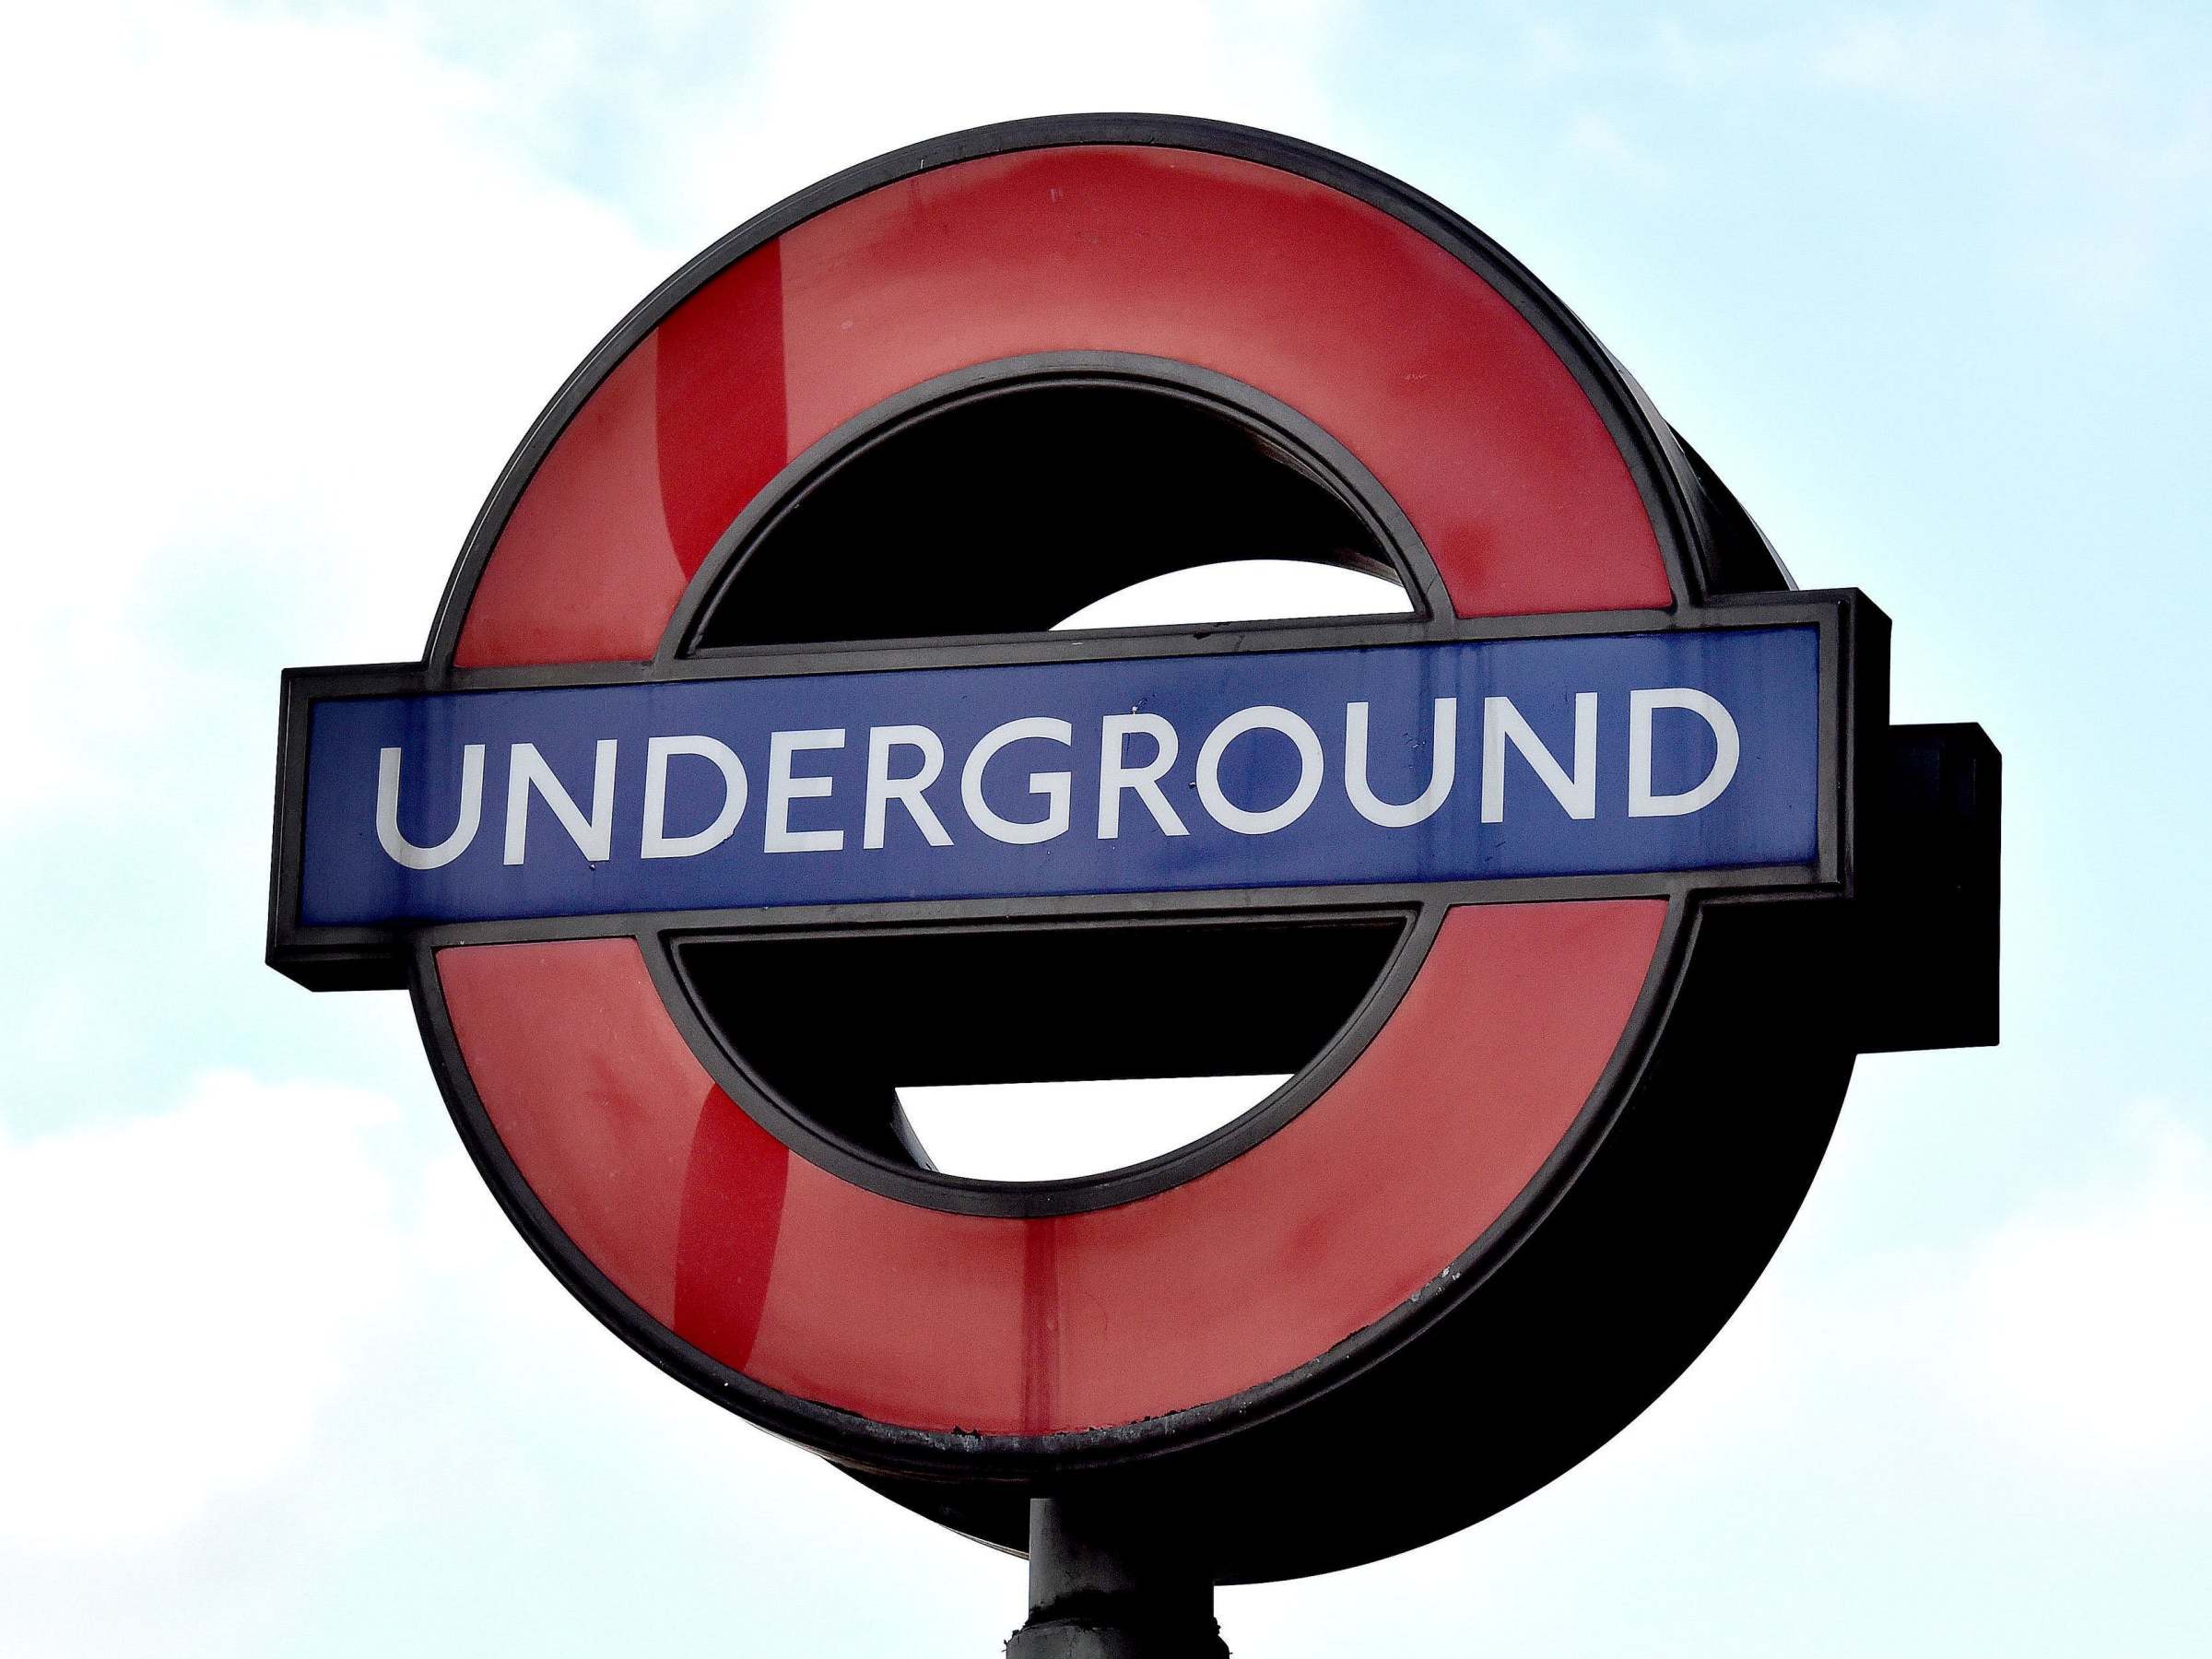 A man has been arrested after Jewish children were abused on the Northern Line